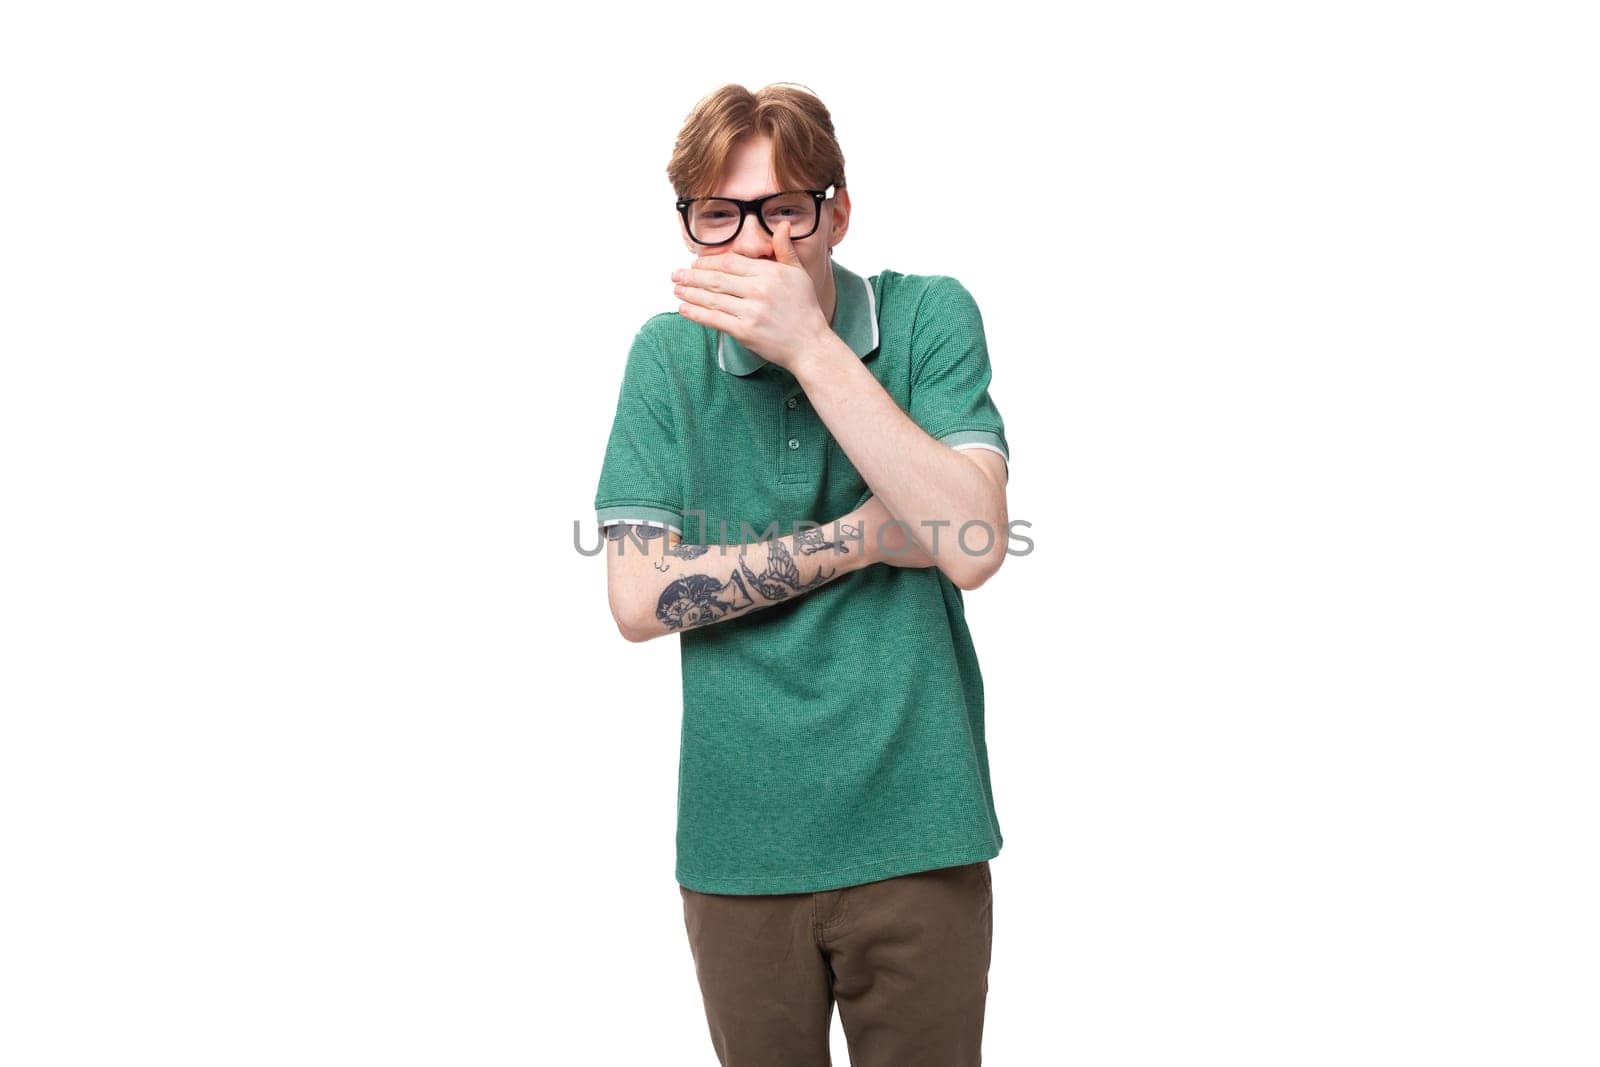 young caucasian man with red hair dressed in a green t-shirt laughs with his mouth closed on the background with copy space.